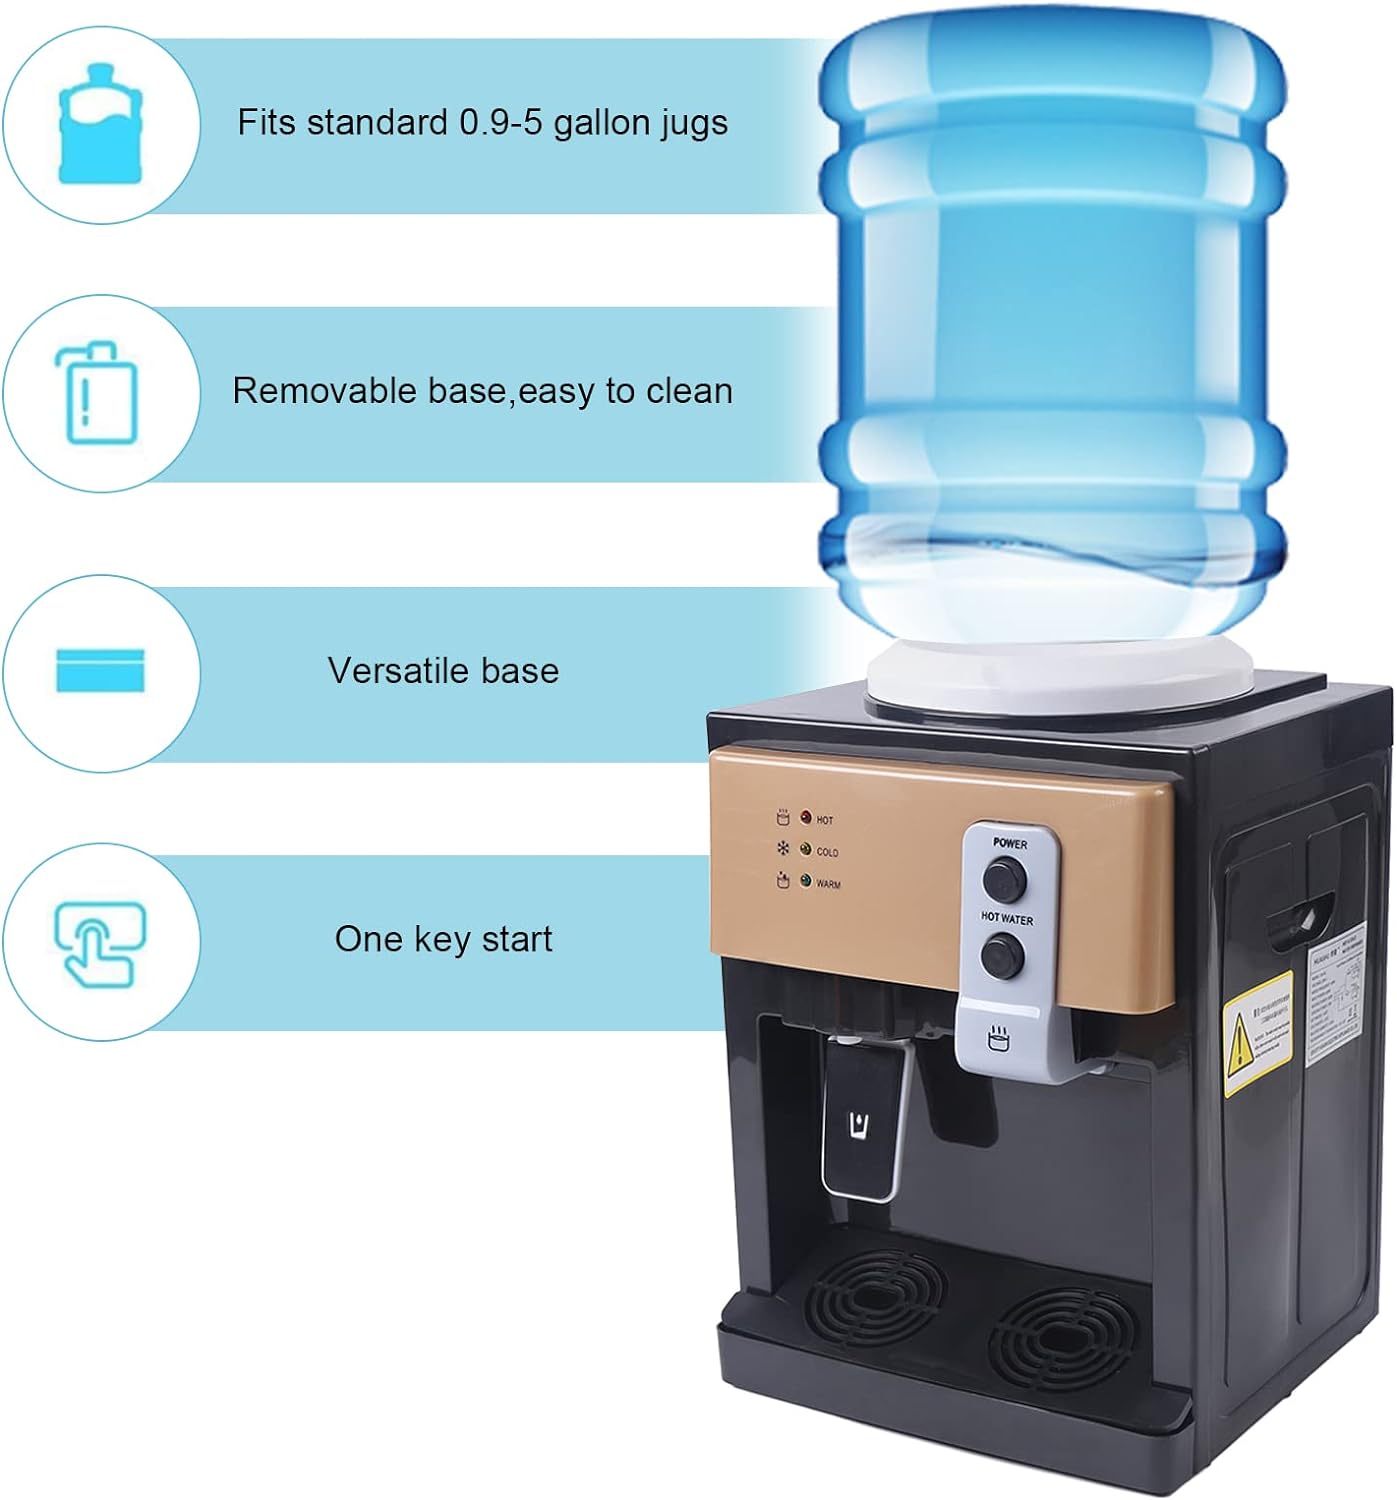 SHIOUCY Top Loading Water Cooler Dispenser - Desktop Electric Hot and Cold Water Dispenser,3 Temperature Settings - Boiling Water, Norm